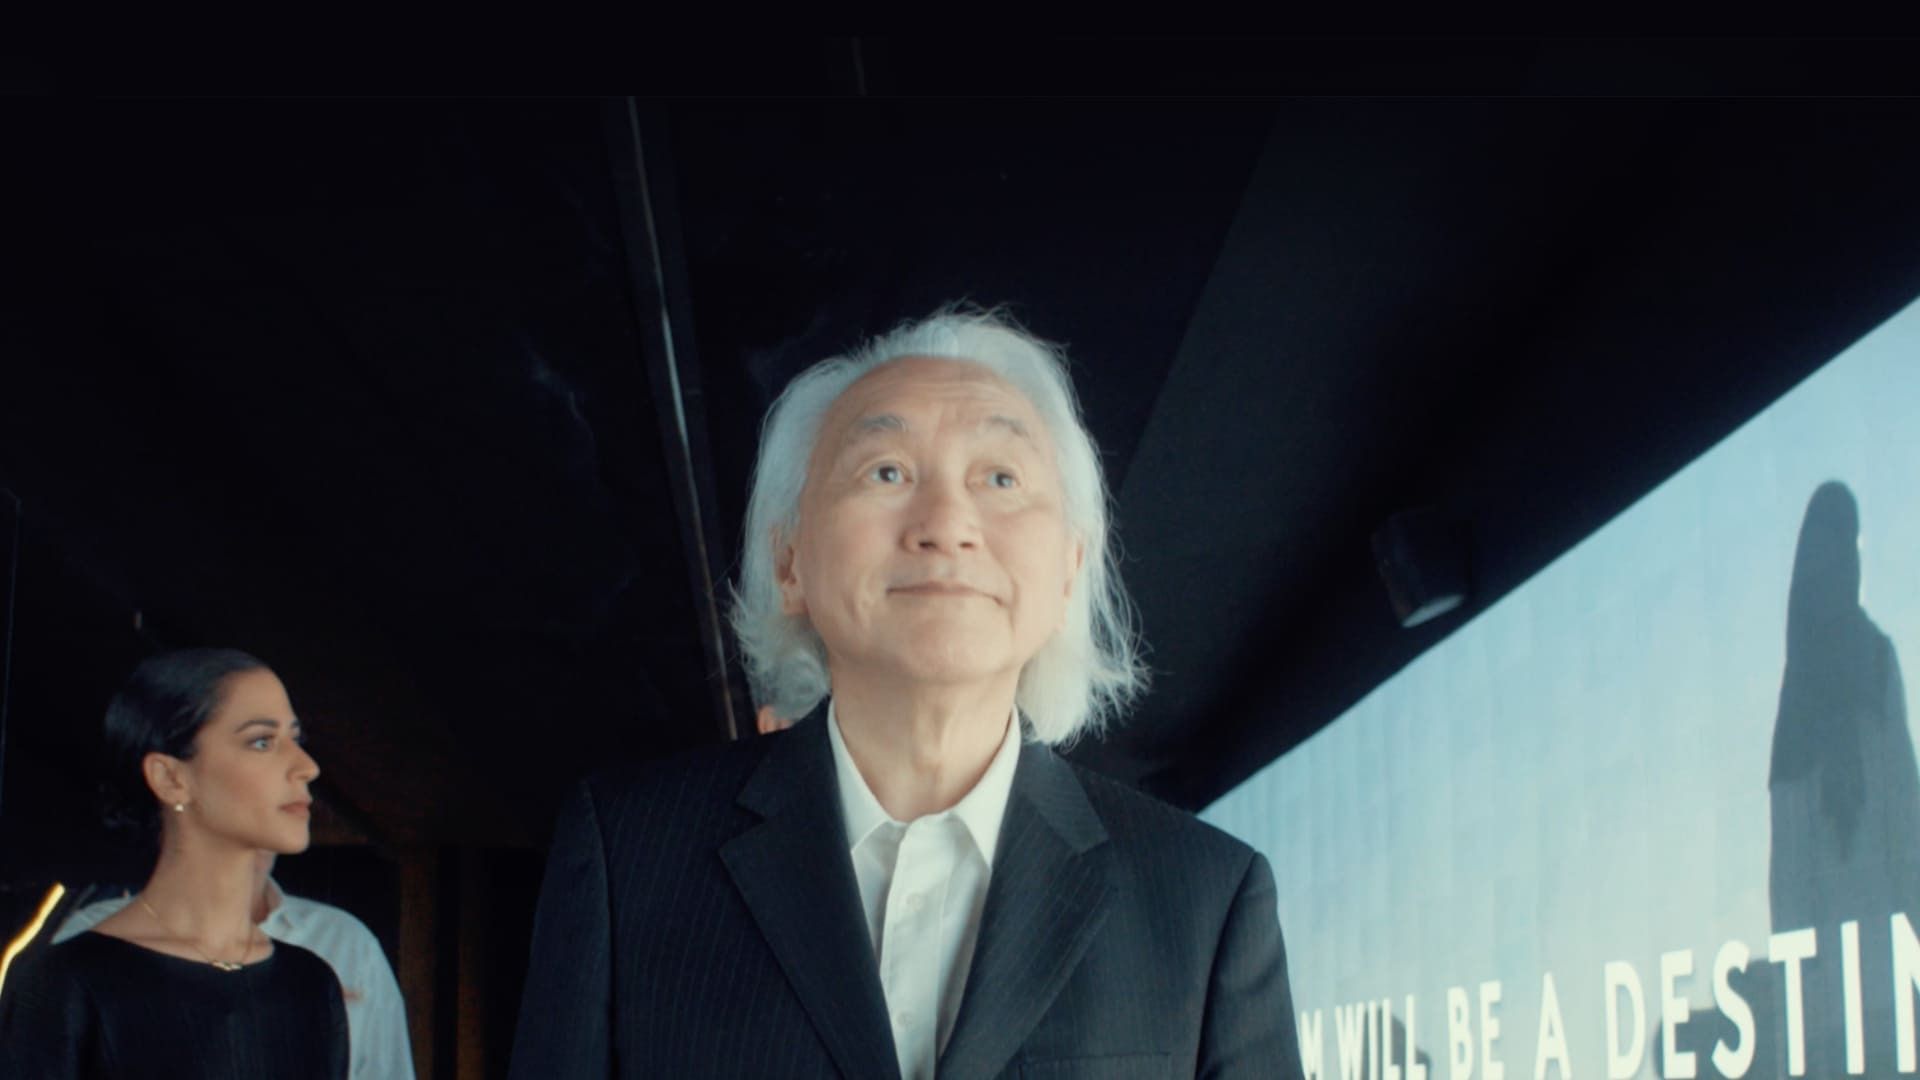 Professor Michio Kaku visits THE LINE to learn about NEOM’s city of the future